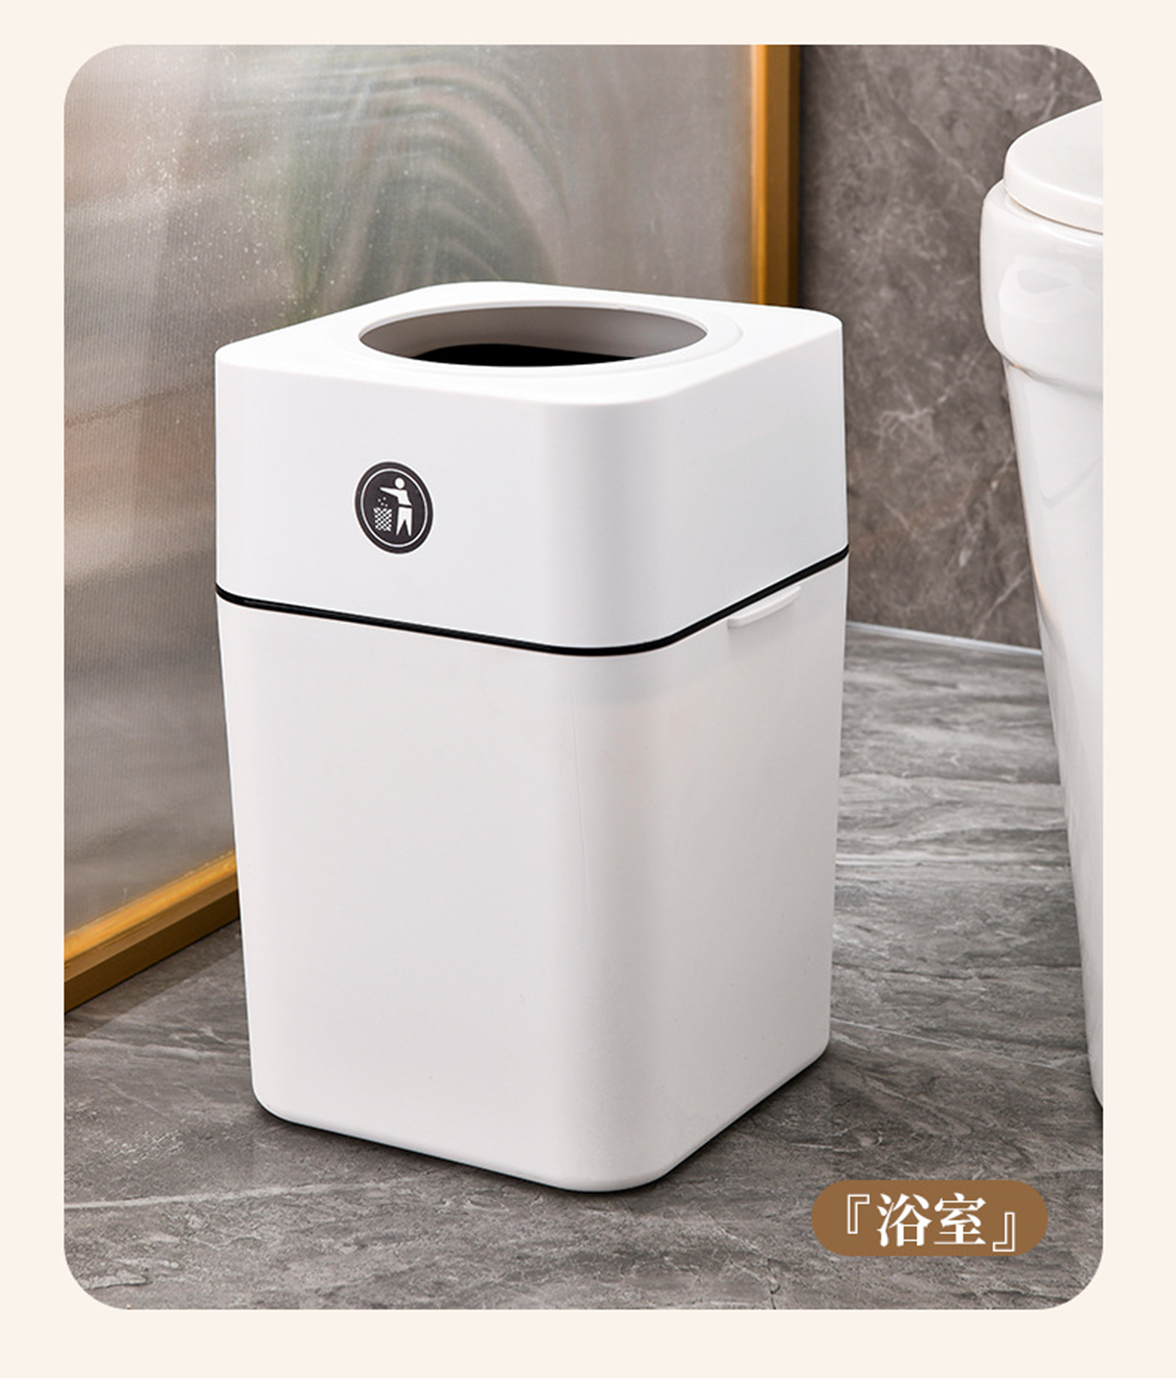 Kitchen Trash Cans Recycle Bin Cubo Basura Reciclaje Cube Garbage Recycling  Living Room Waste Press The Cover Y200429 From Shanye10, $13.02